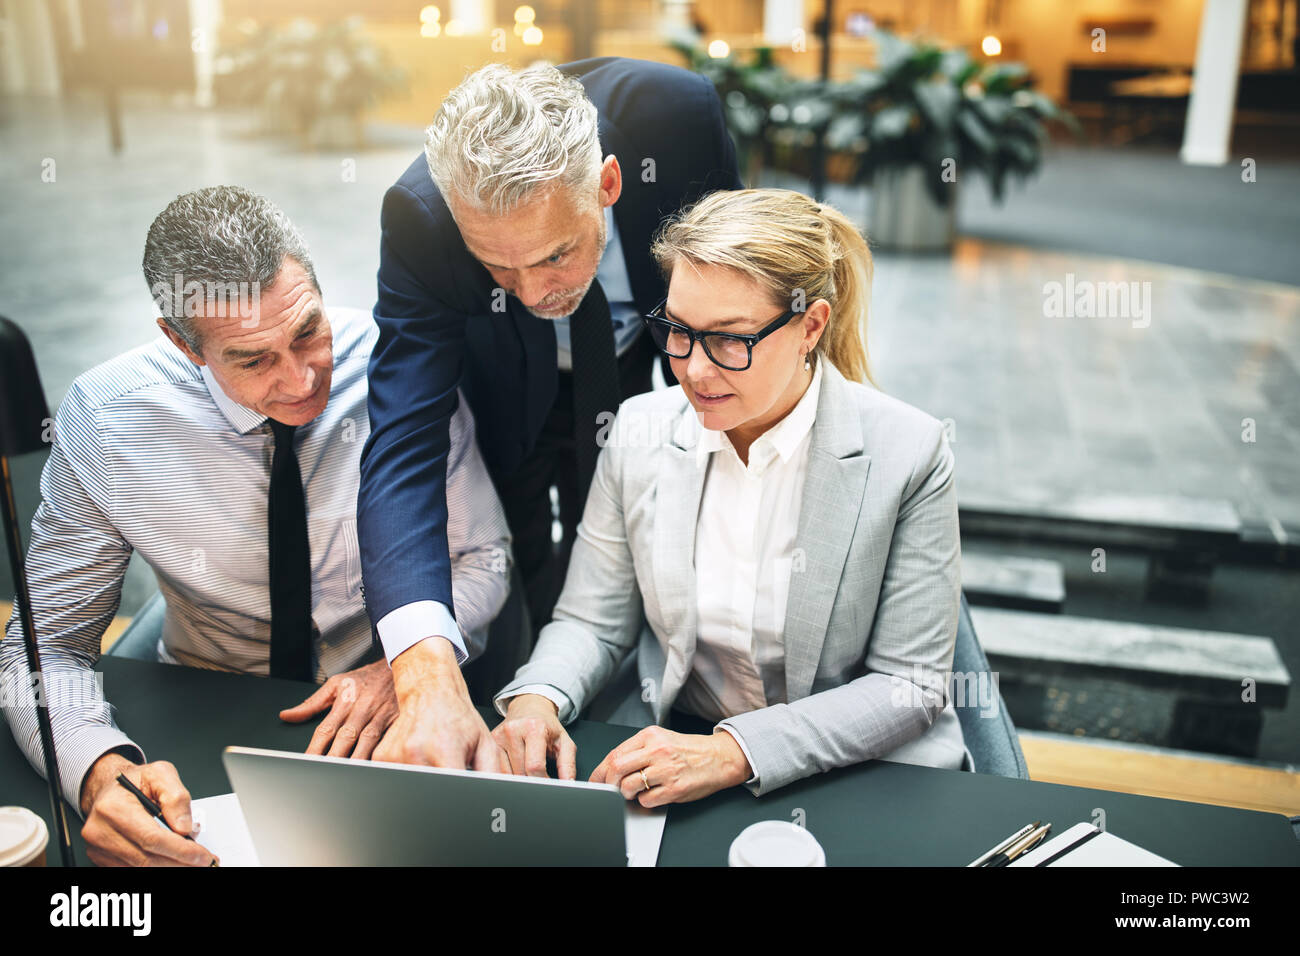 Mature manager and two work colleagues talking together over a laptop during a meeting in the lobby of a modern office Stock Photo